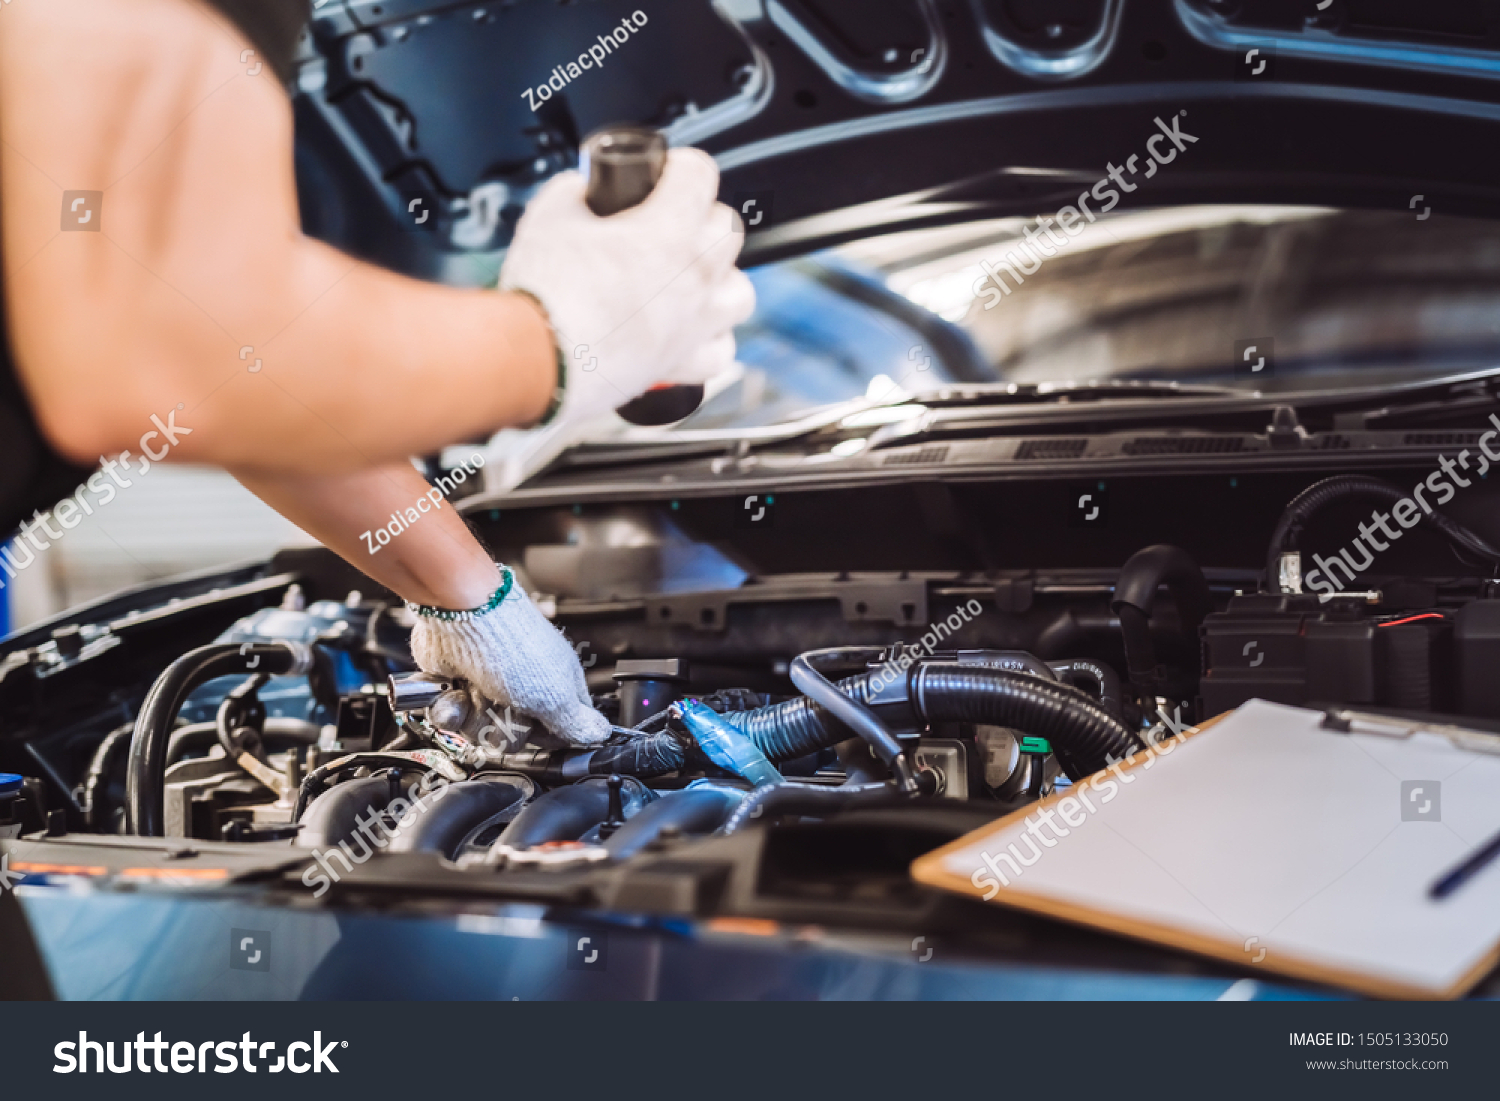 Mechanic man examining and maintenance to customer the engine a vehicle car hood, Safety inspection test engine before customer drive on a long journey, transportation repair service center #1505133050